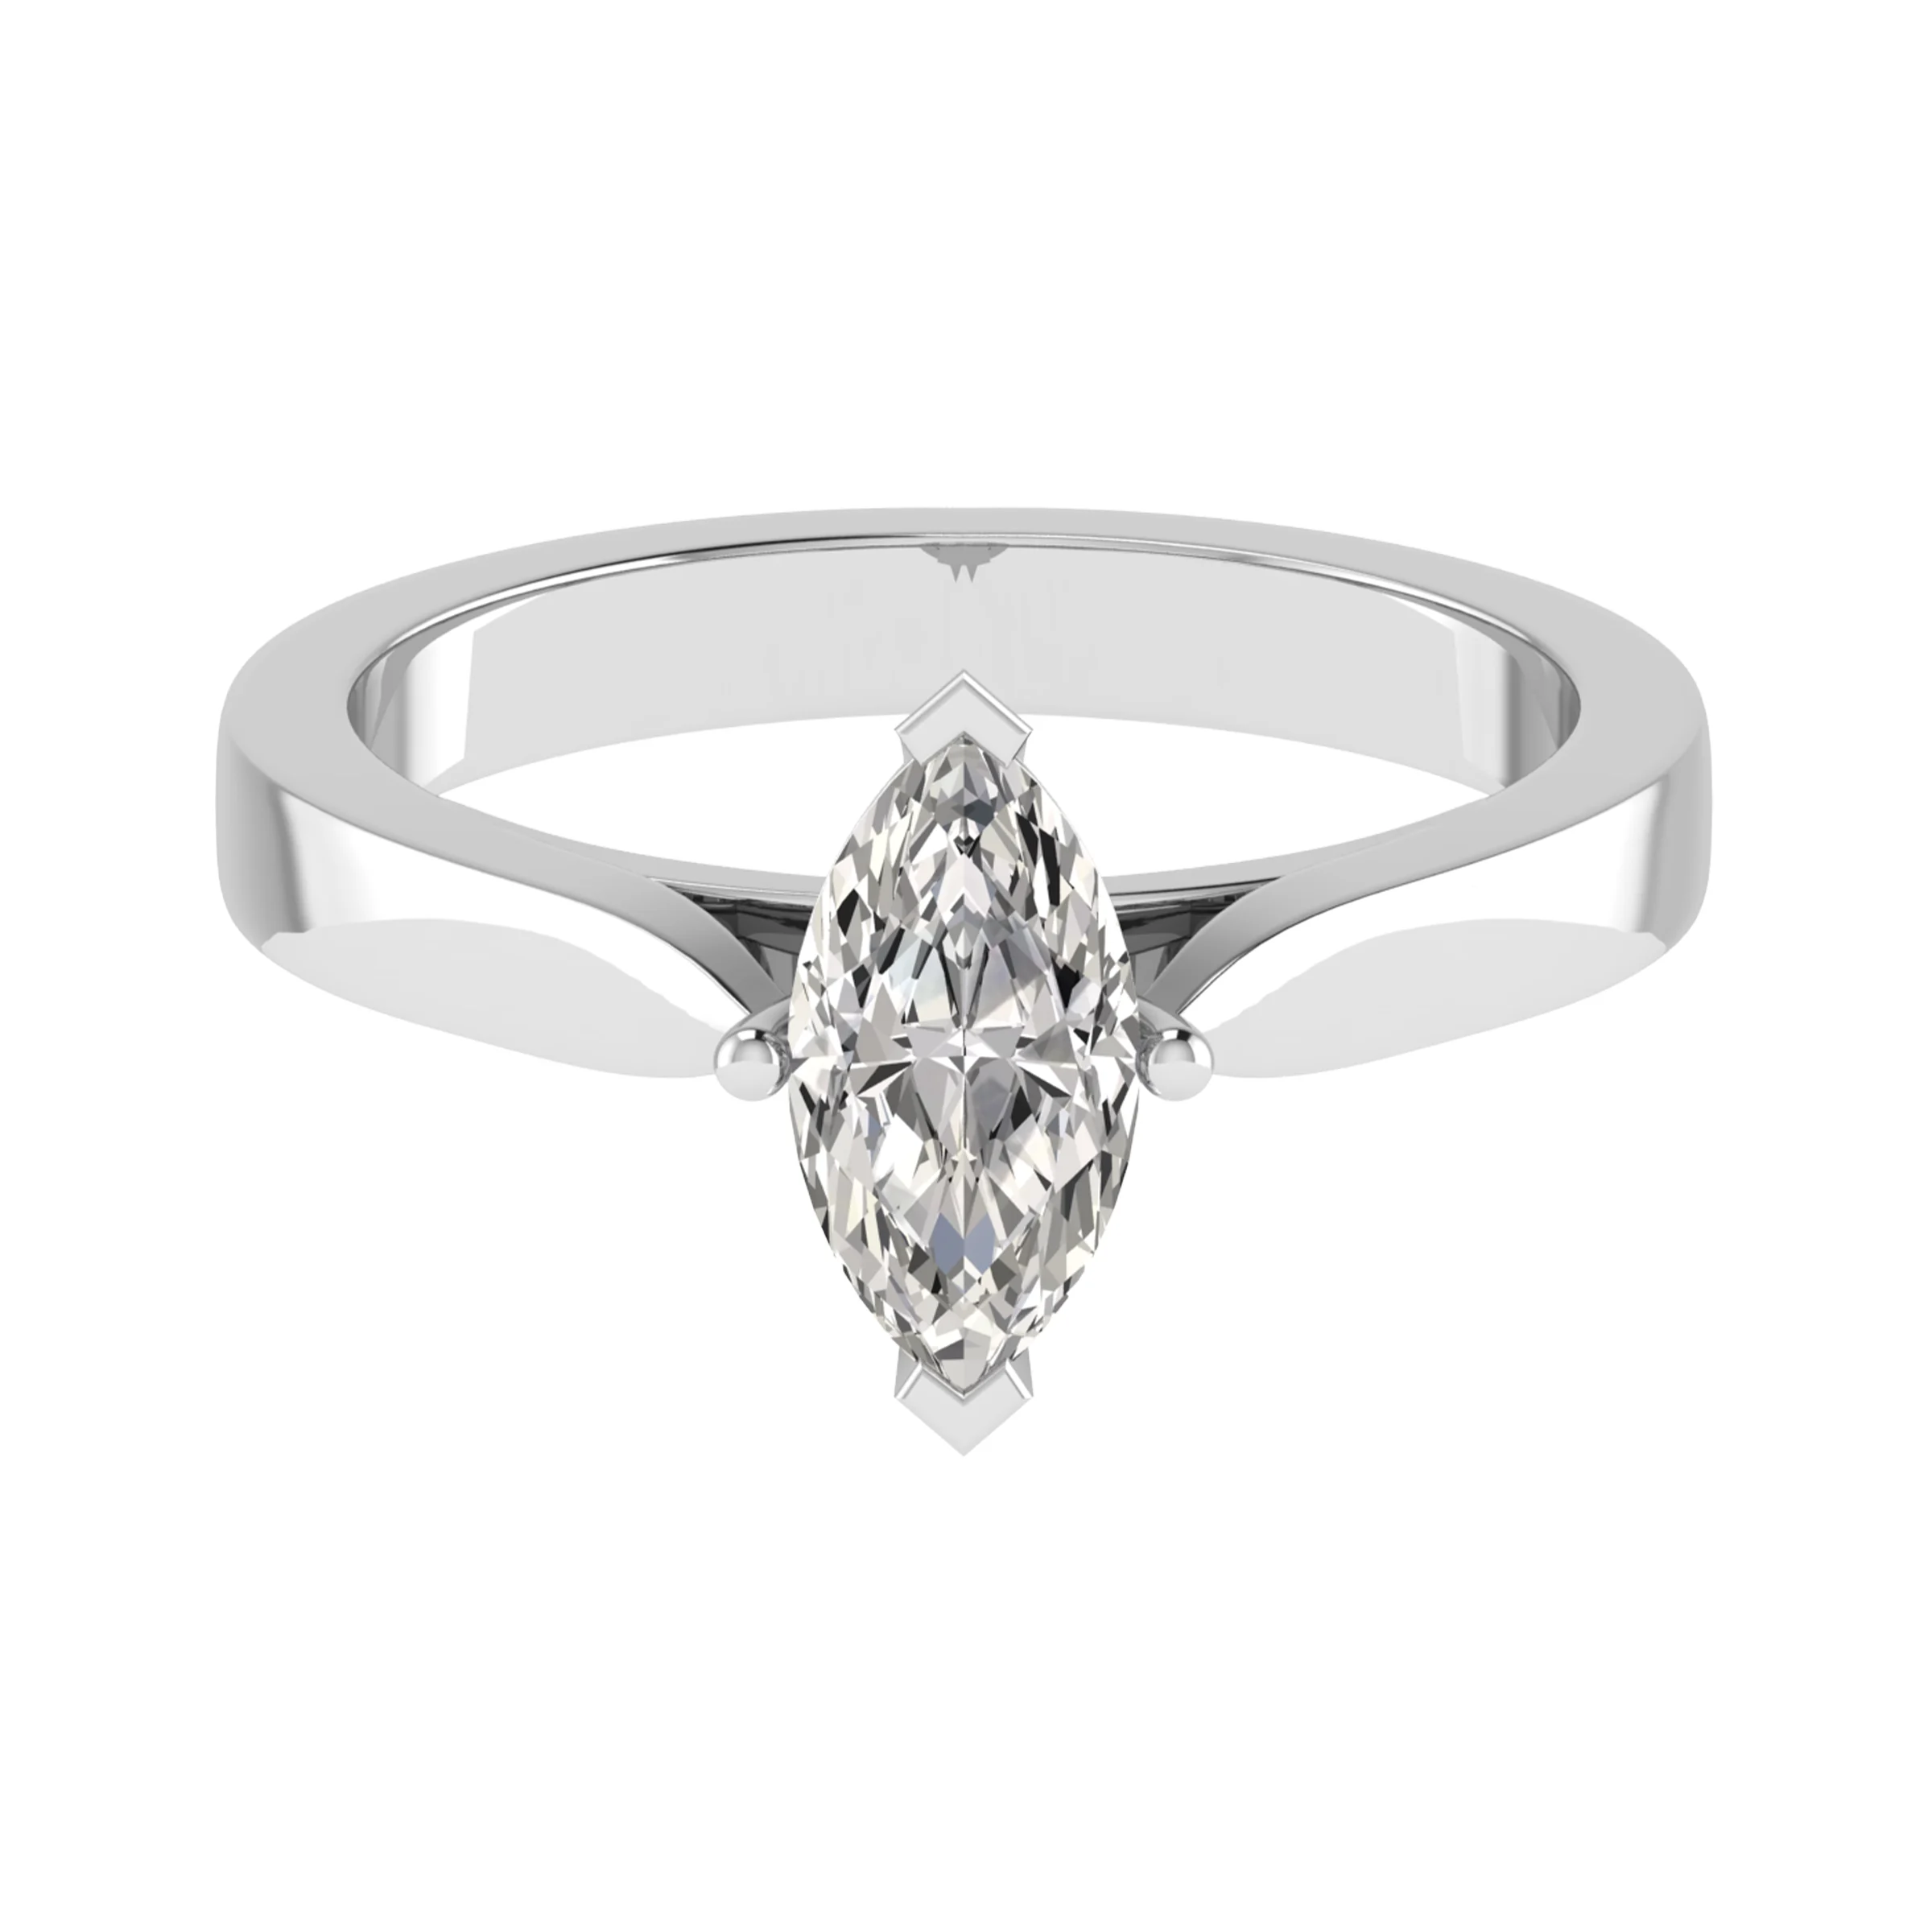 SOLITAIRE MARQUISE CUT DIAMOND ENGAGEMENT RING